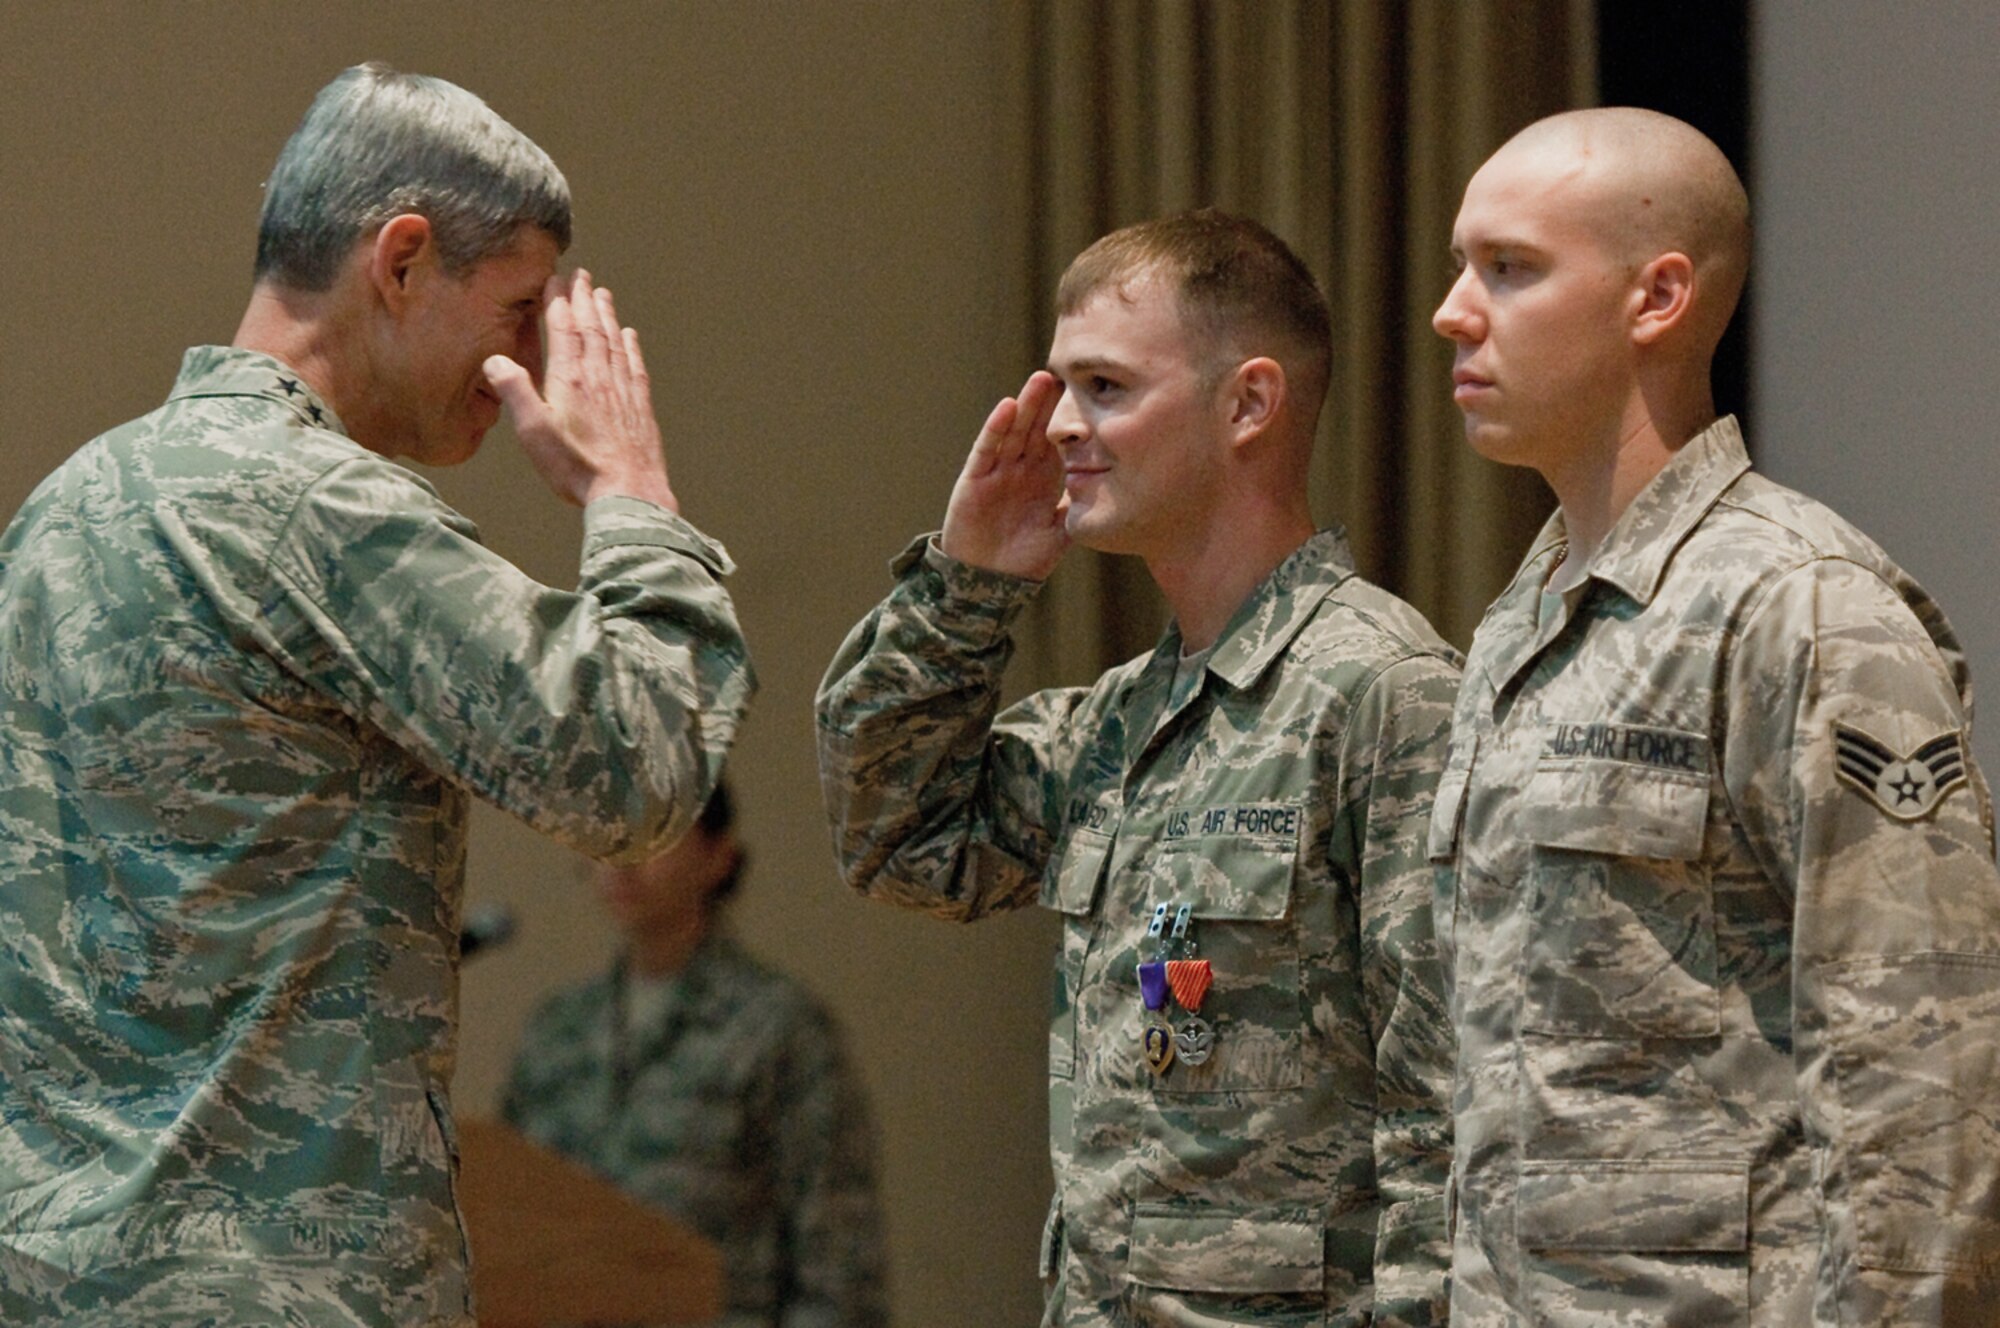 Air Force Chief of Staff Gen. Norton Schwartz presents a Purple Heart and an Air Force Combat Action Medal to Senior Airman Brian Willard during a commander's call June 22, 2010, at the 386th Air Expeditionary Wing in Southwest Asia. Airman Willard, a vehicle operator assigned to the 386th Expeditionary Logistics Readiness Squadron here, was injured May 27, 2010, when his supply convoy was hit by an improvised explosive device. (U.S. Air Force photo/Maj. Dale Greer)